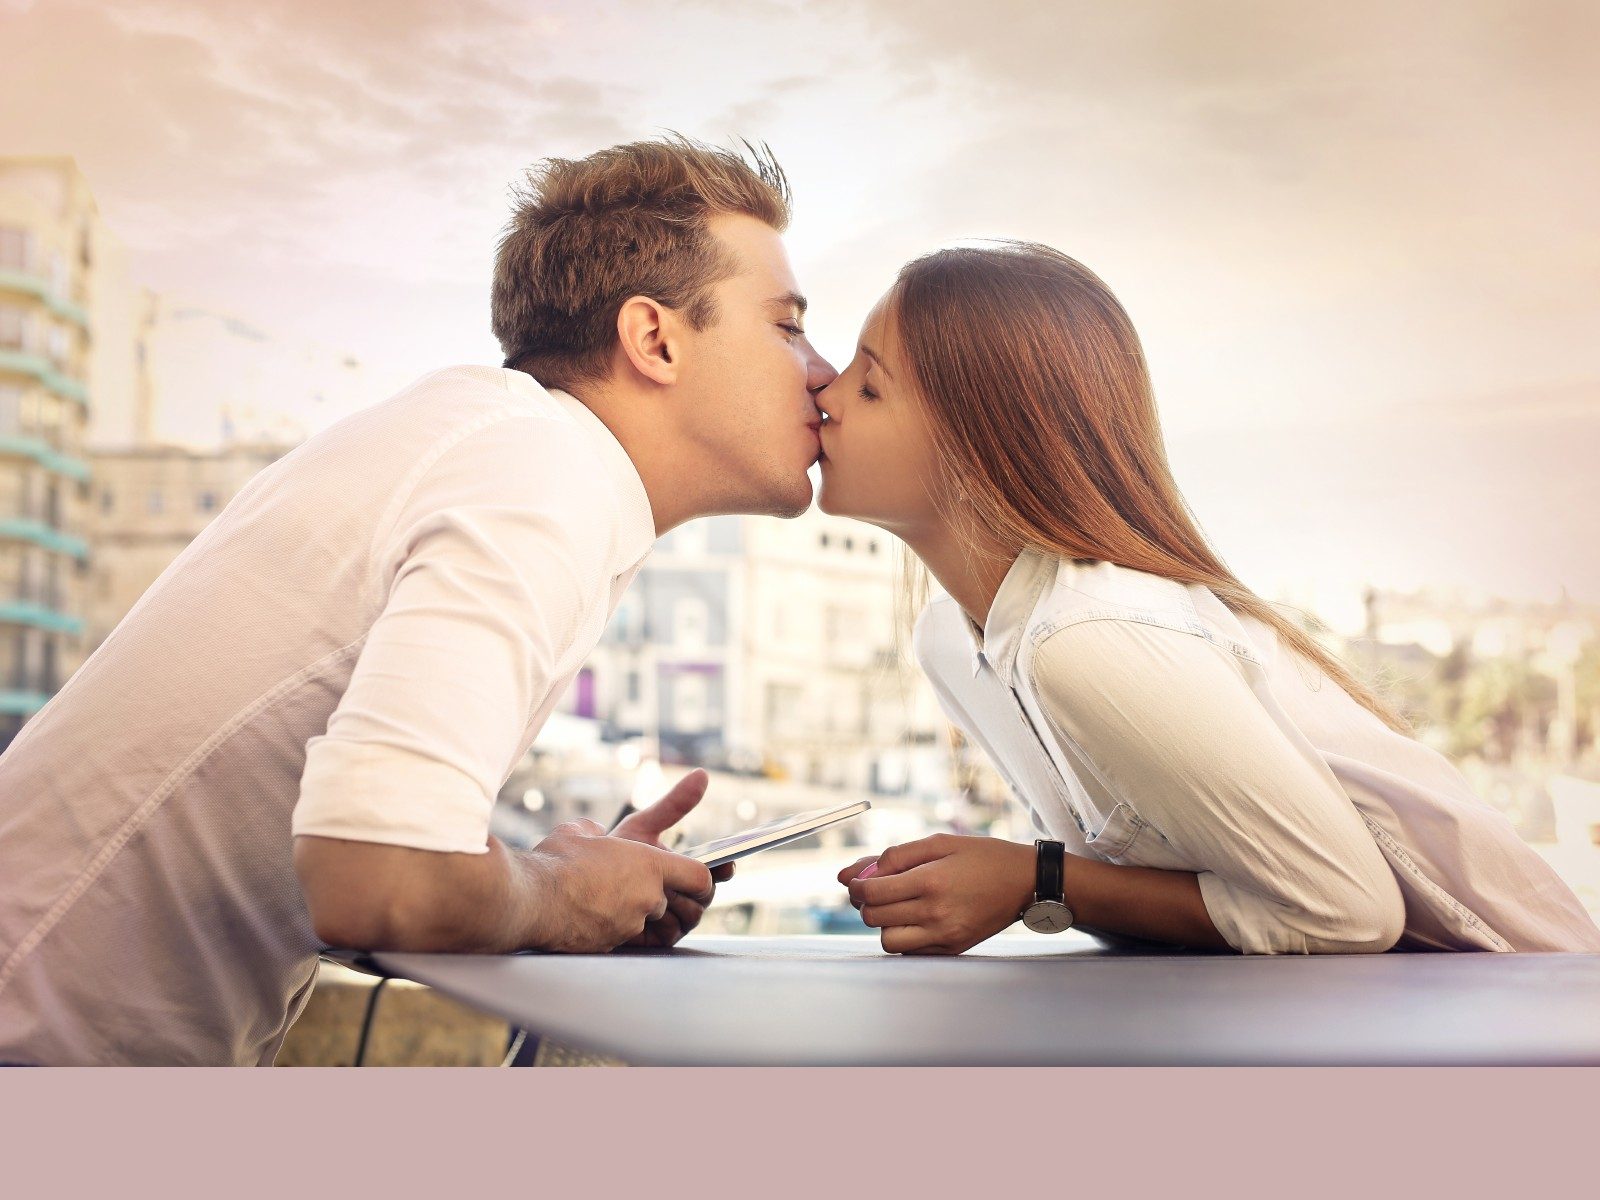 15 Absolutely Sexy & Romantic Types of Kisses You Should Know